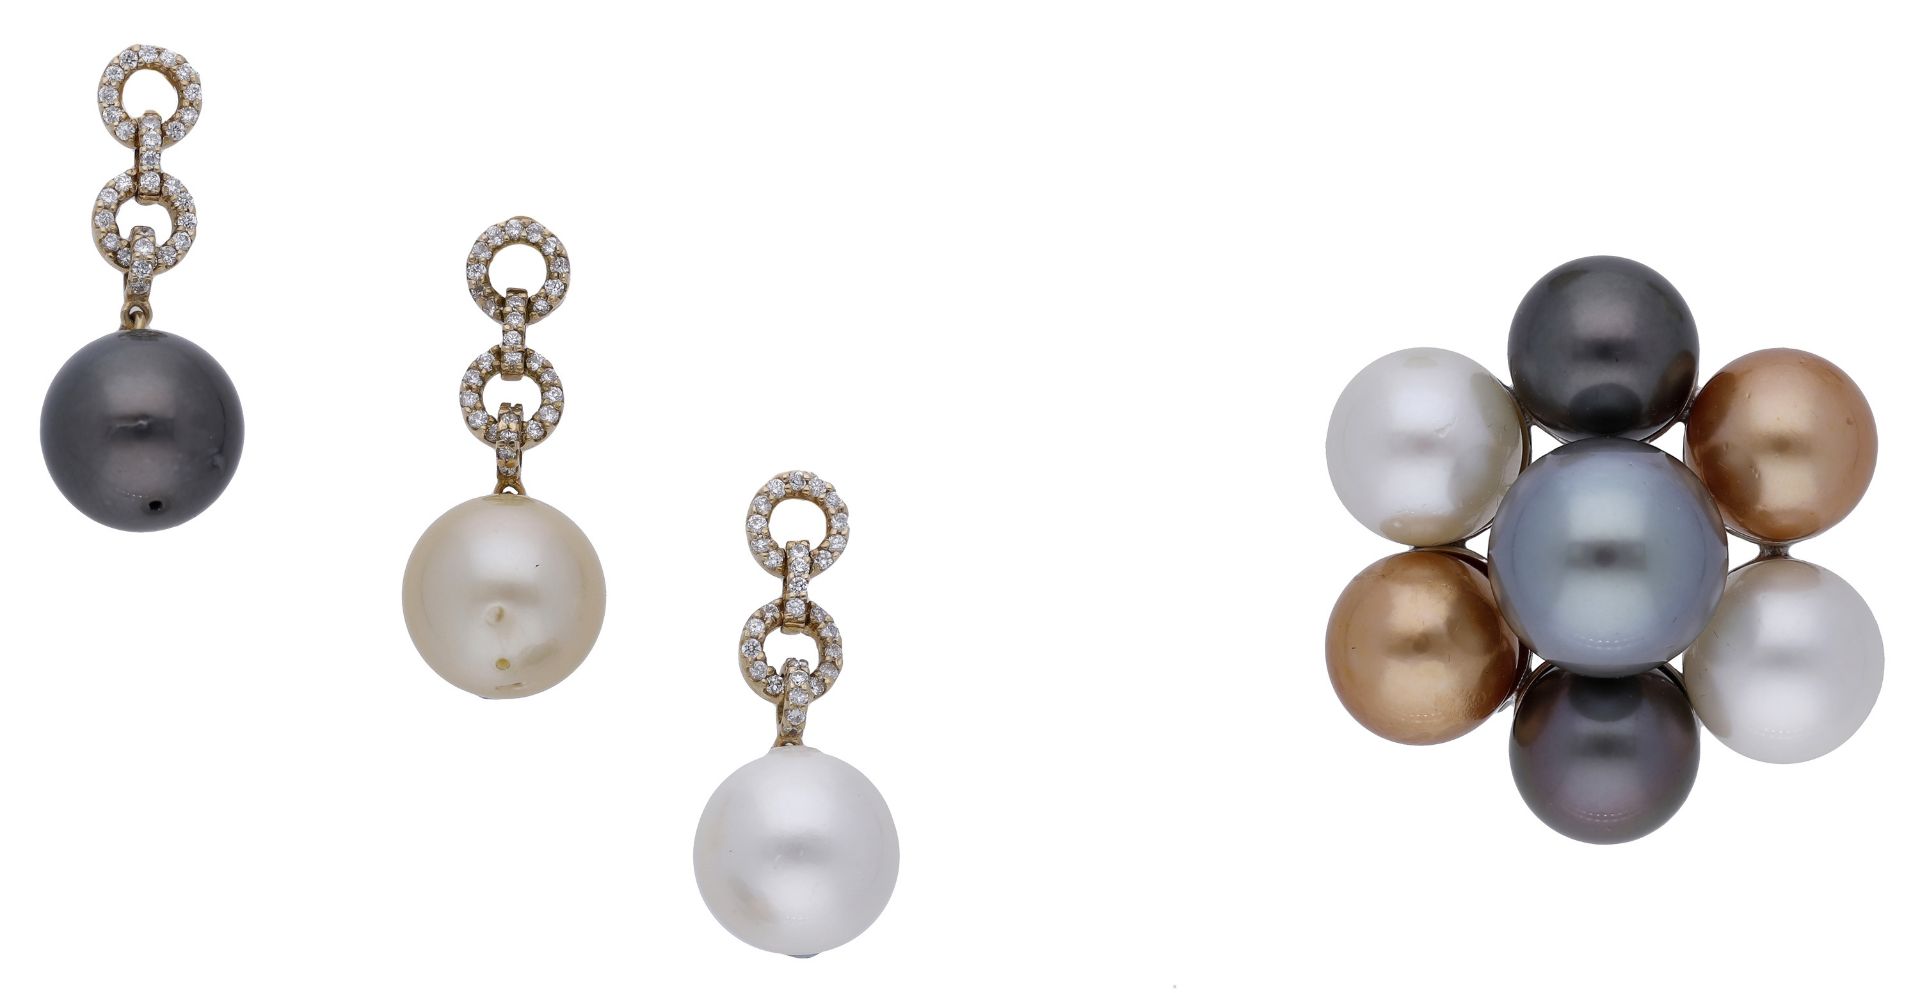 A cultured pearl brooch and interchangeable earring suite, the brooch of flowerhead design and se...